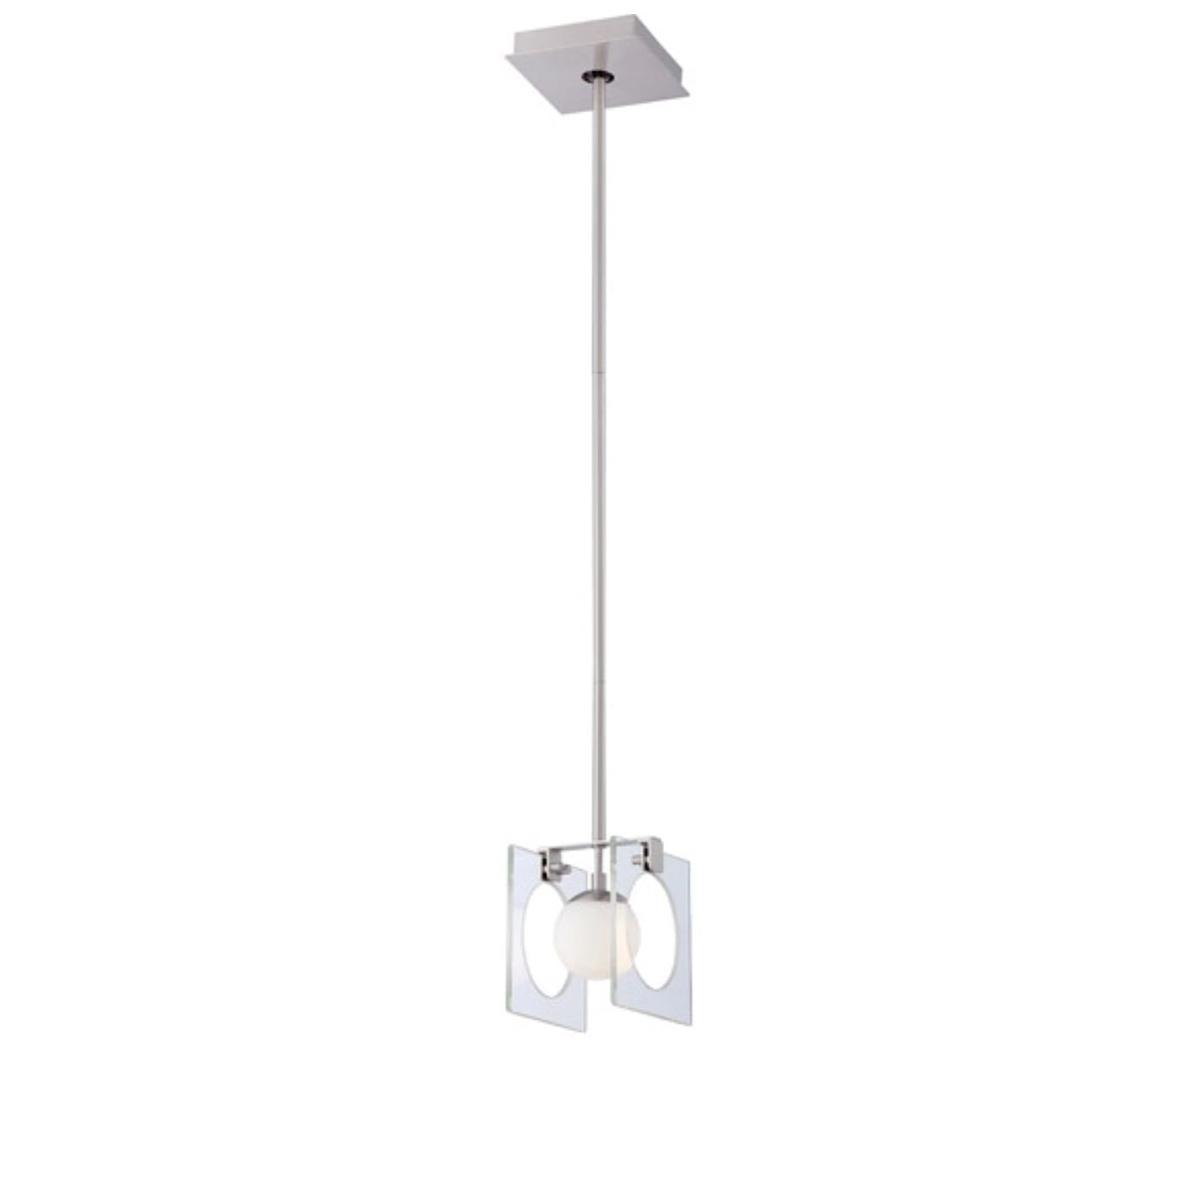 Hole In One 5 in. Pendant Light Brushed Nickel finish